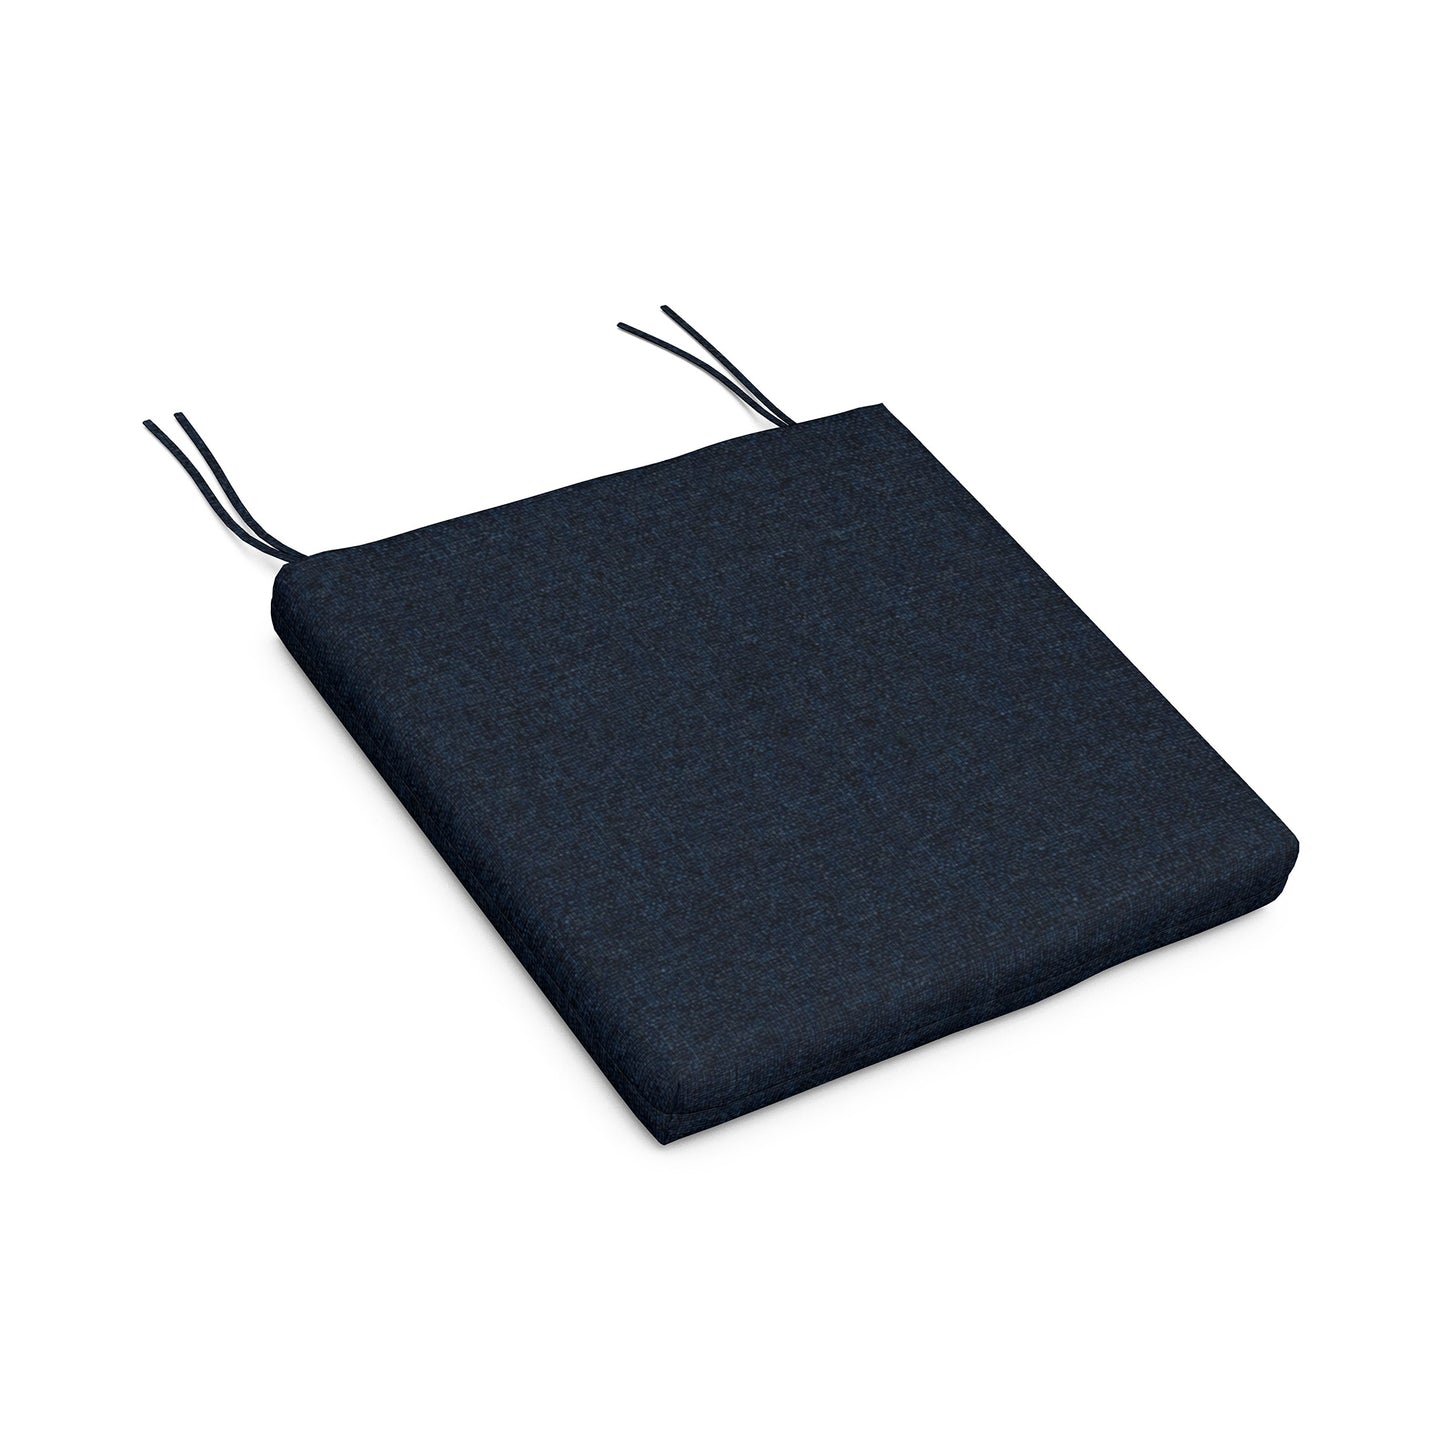 A dark blue POLYWOOD® XPWS0001 - Seat Cushion with two black ties at the back, isolated on a white background.